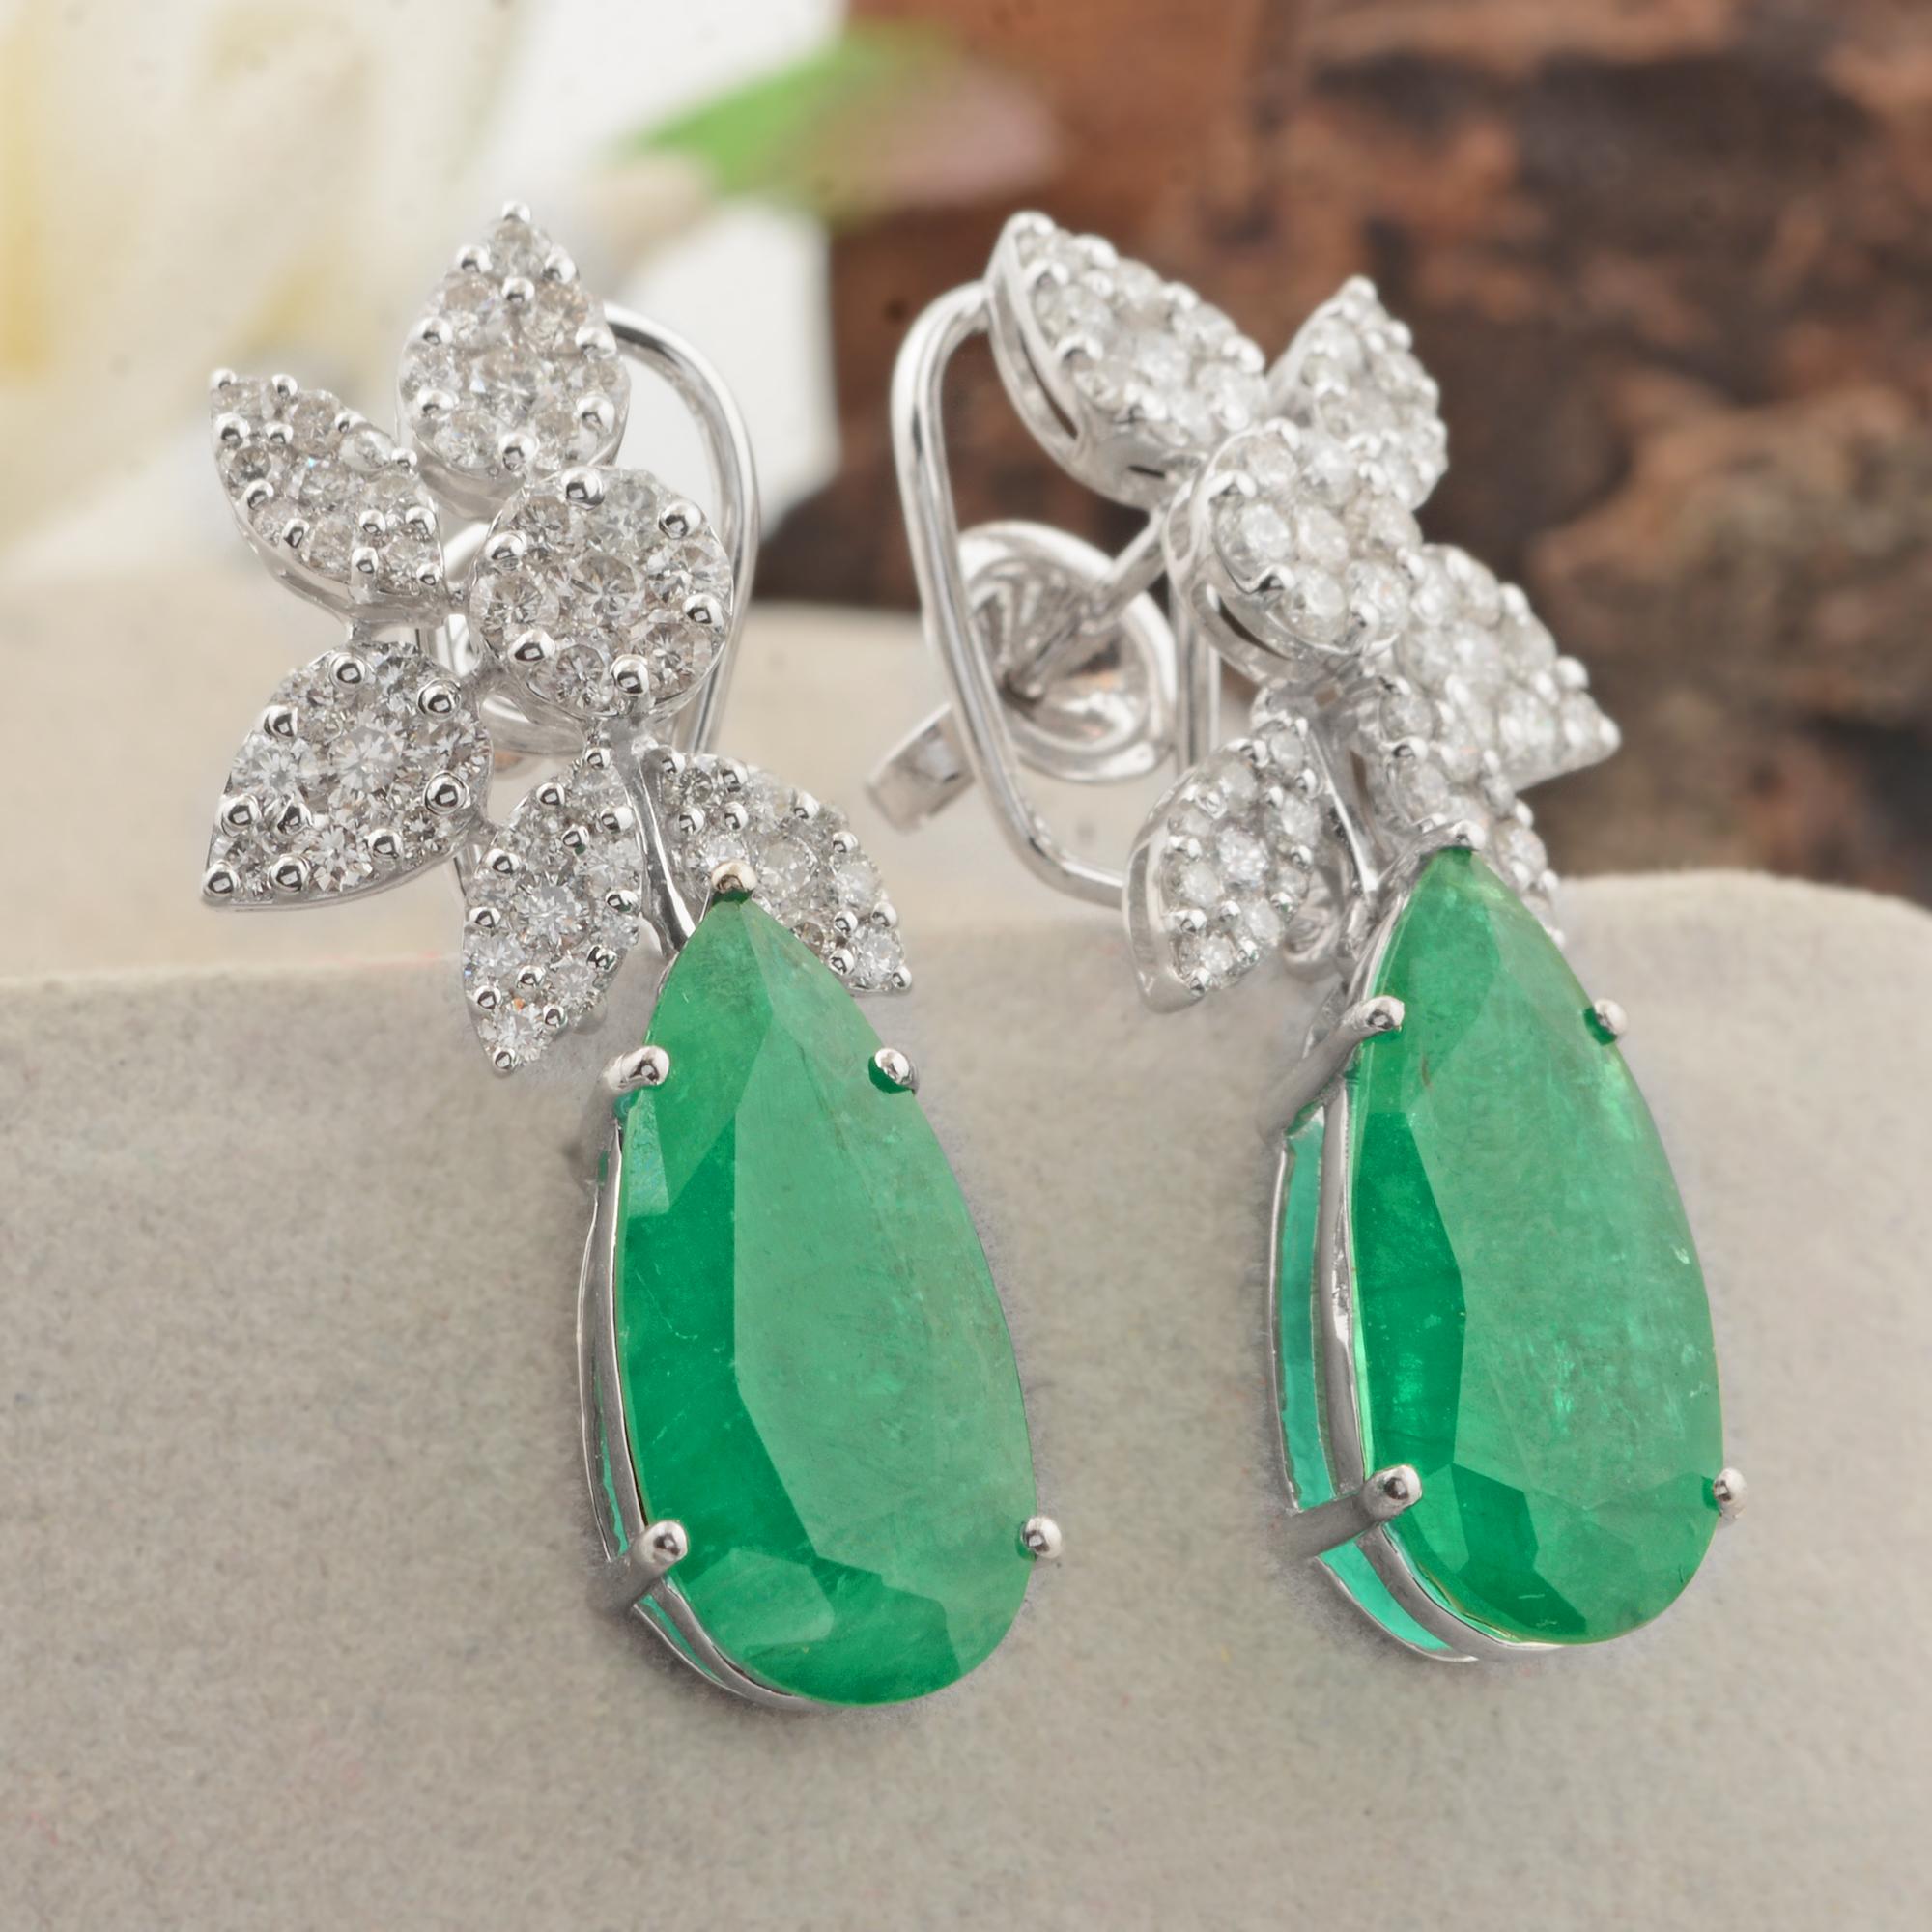 Item Code :- SEE-11079
Gross Weight :- 12.30 gm
18k White Gold Wt :- 9.64 gm
Diamond Wt :- 2.25 ct  ( AVERAGE DIAMOND CLARITY SI1-SI2 & COLOR H-I )
Emerald Wt :- 11.06 ct
Earrings Length :- 38 mm approx.
✦ Sizing
.....................
We can adjust